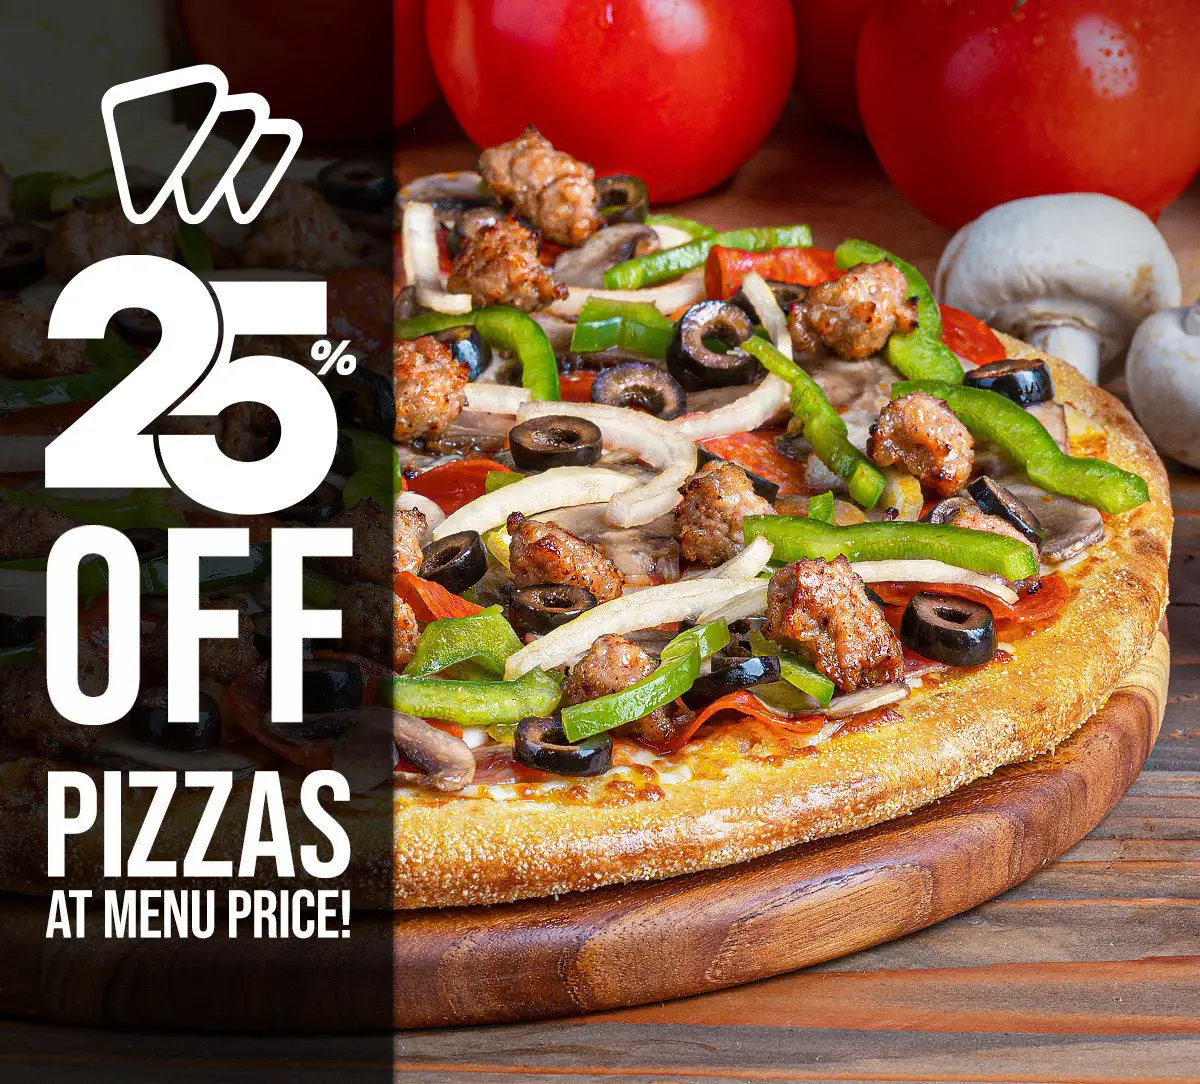 Pizza Guys Presidents Day Get 25% Off Regular Menu-Priced Pizzas